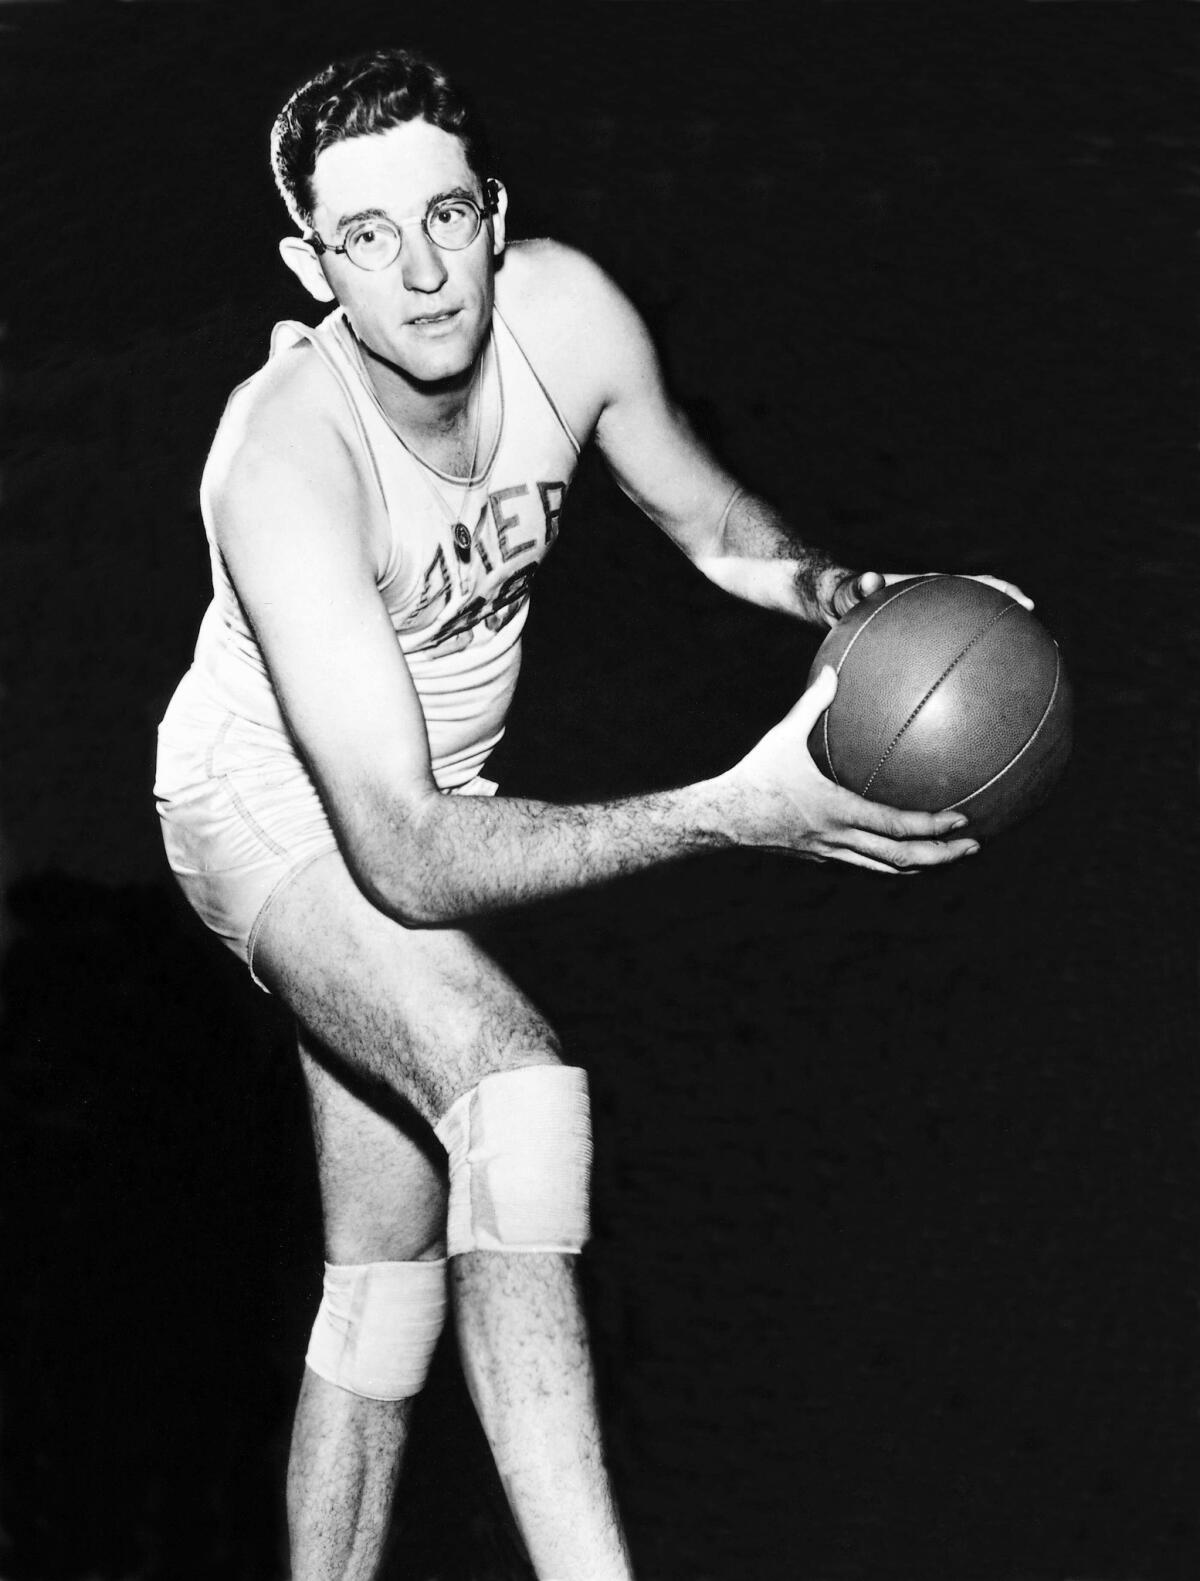 George Mikan lead the Minneapolis Lakers to their first NBA championship in 1949.